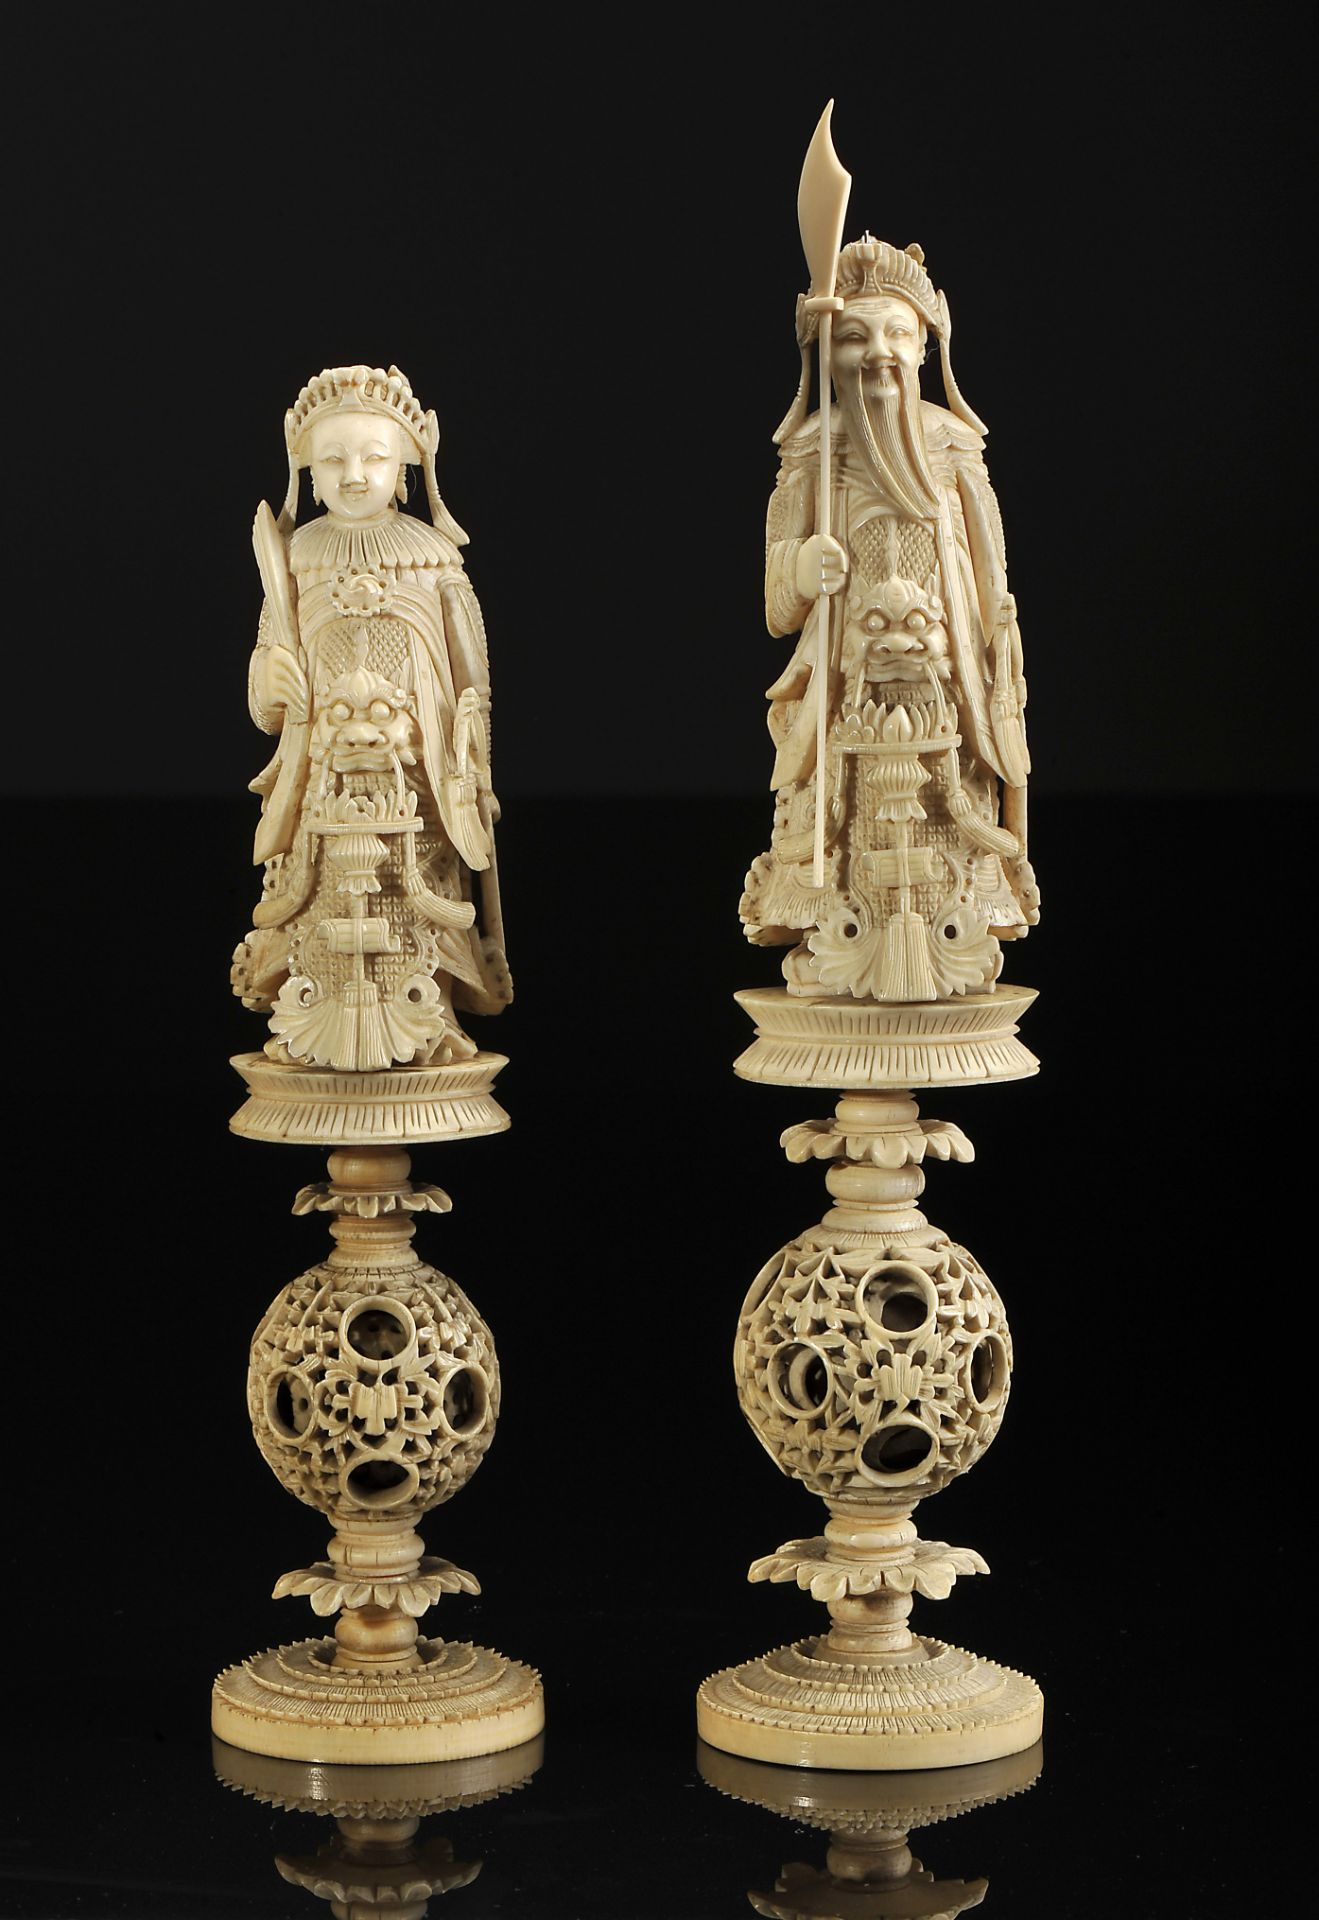 Chess pieces, "Emperor" and "Empress" based on "Ball of happiness"